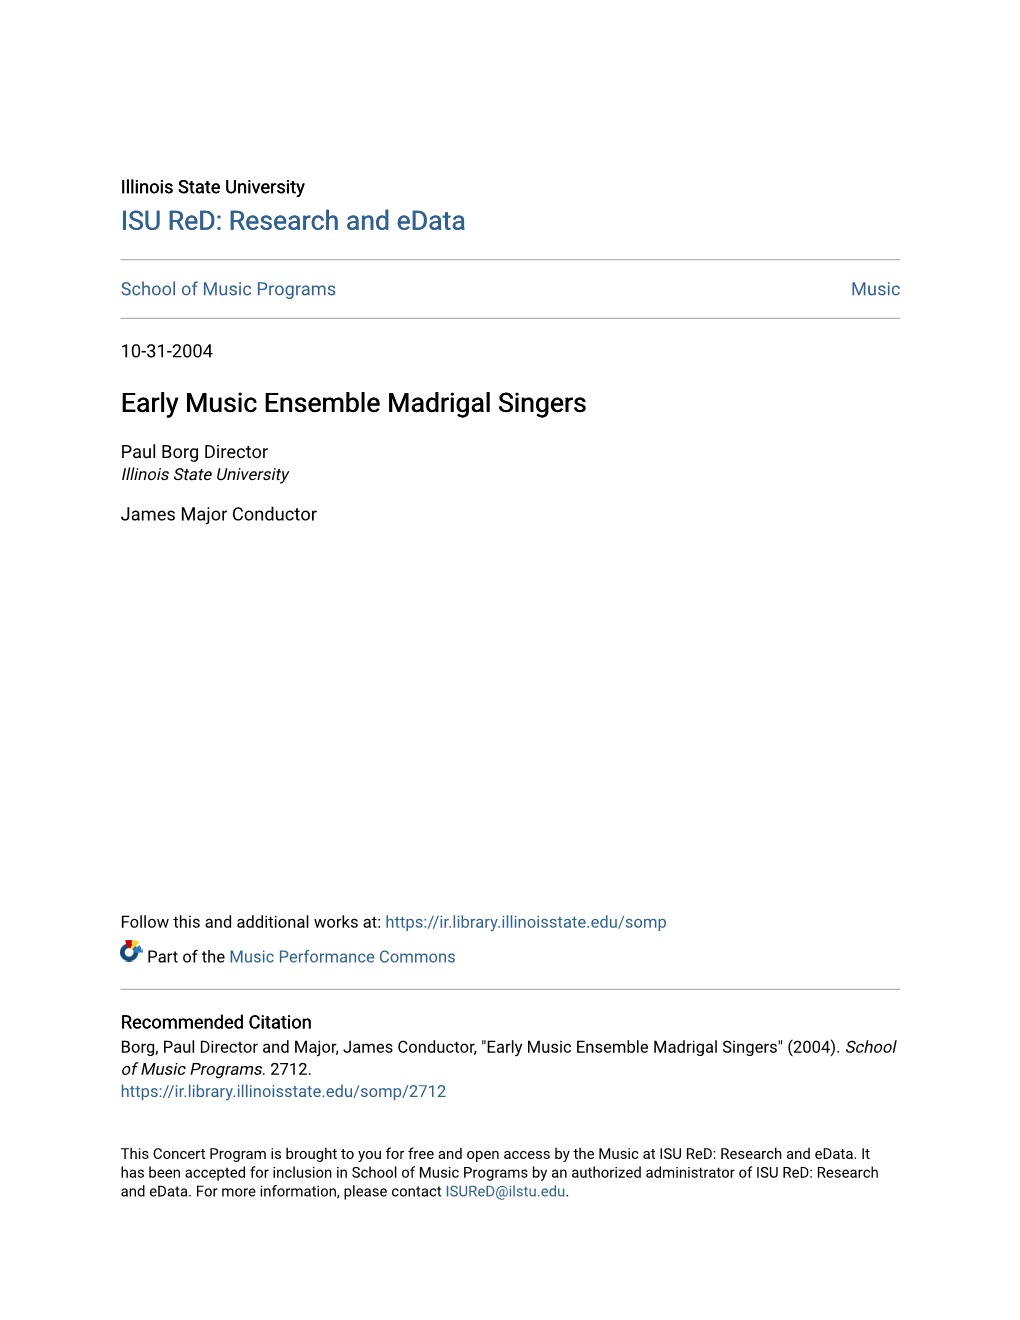 Early Music Ensemble Madrigal Singers